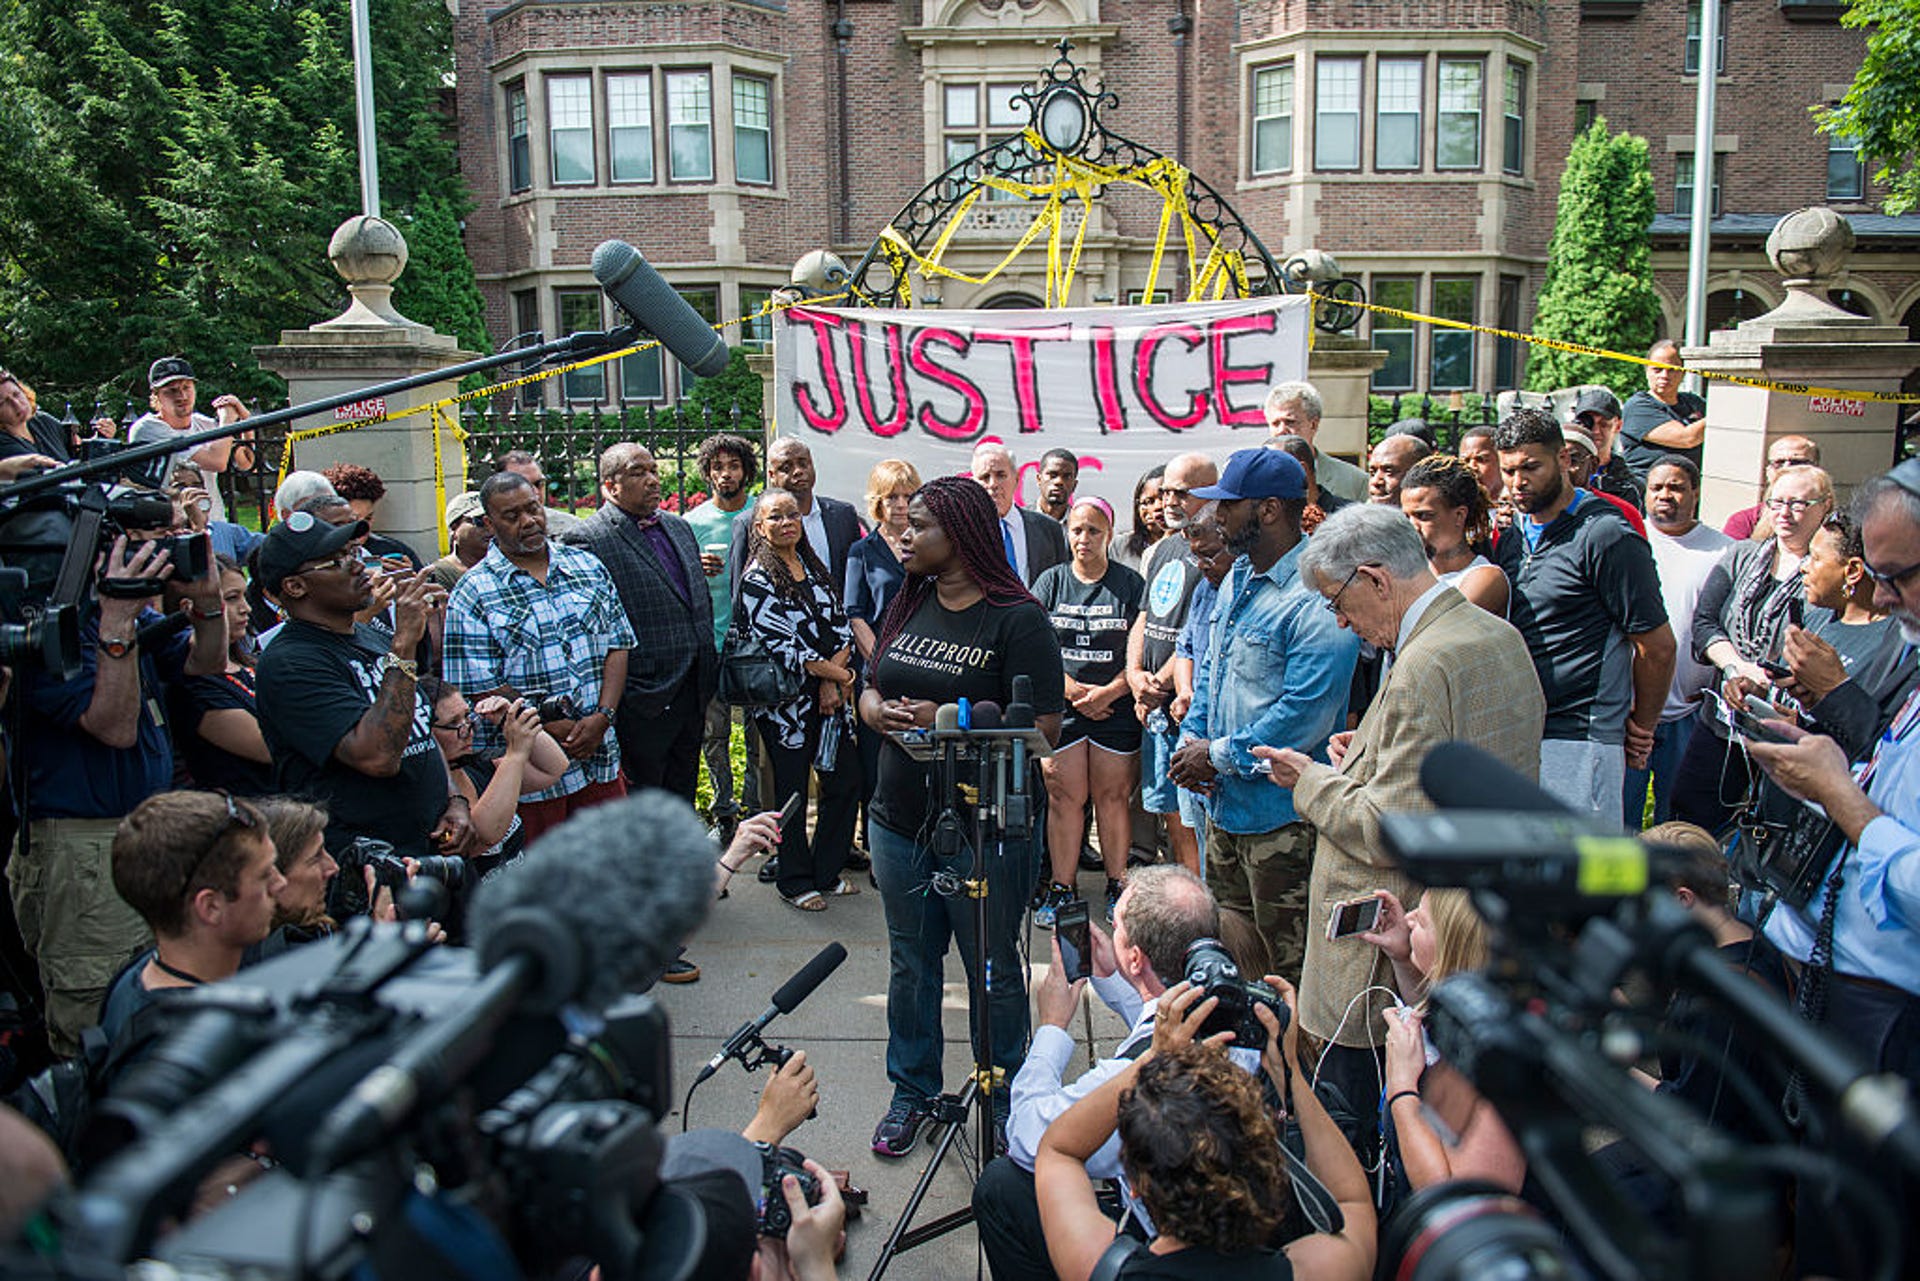 Protesters outside the governor's mansion in St. Paul, Minnesota, following the shooting death of Philando Castile.